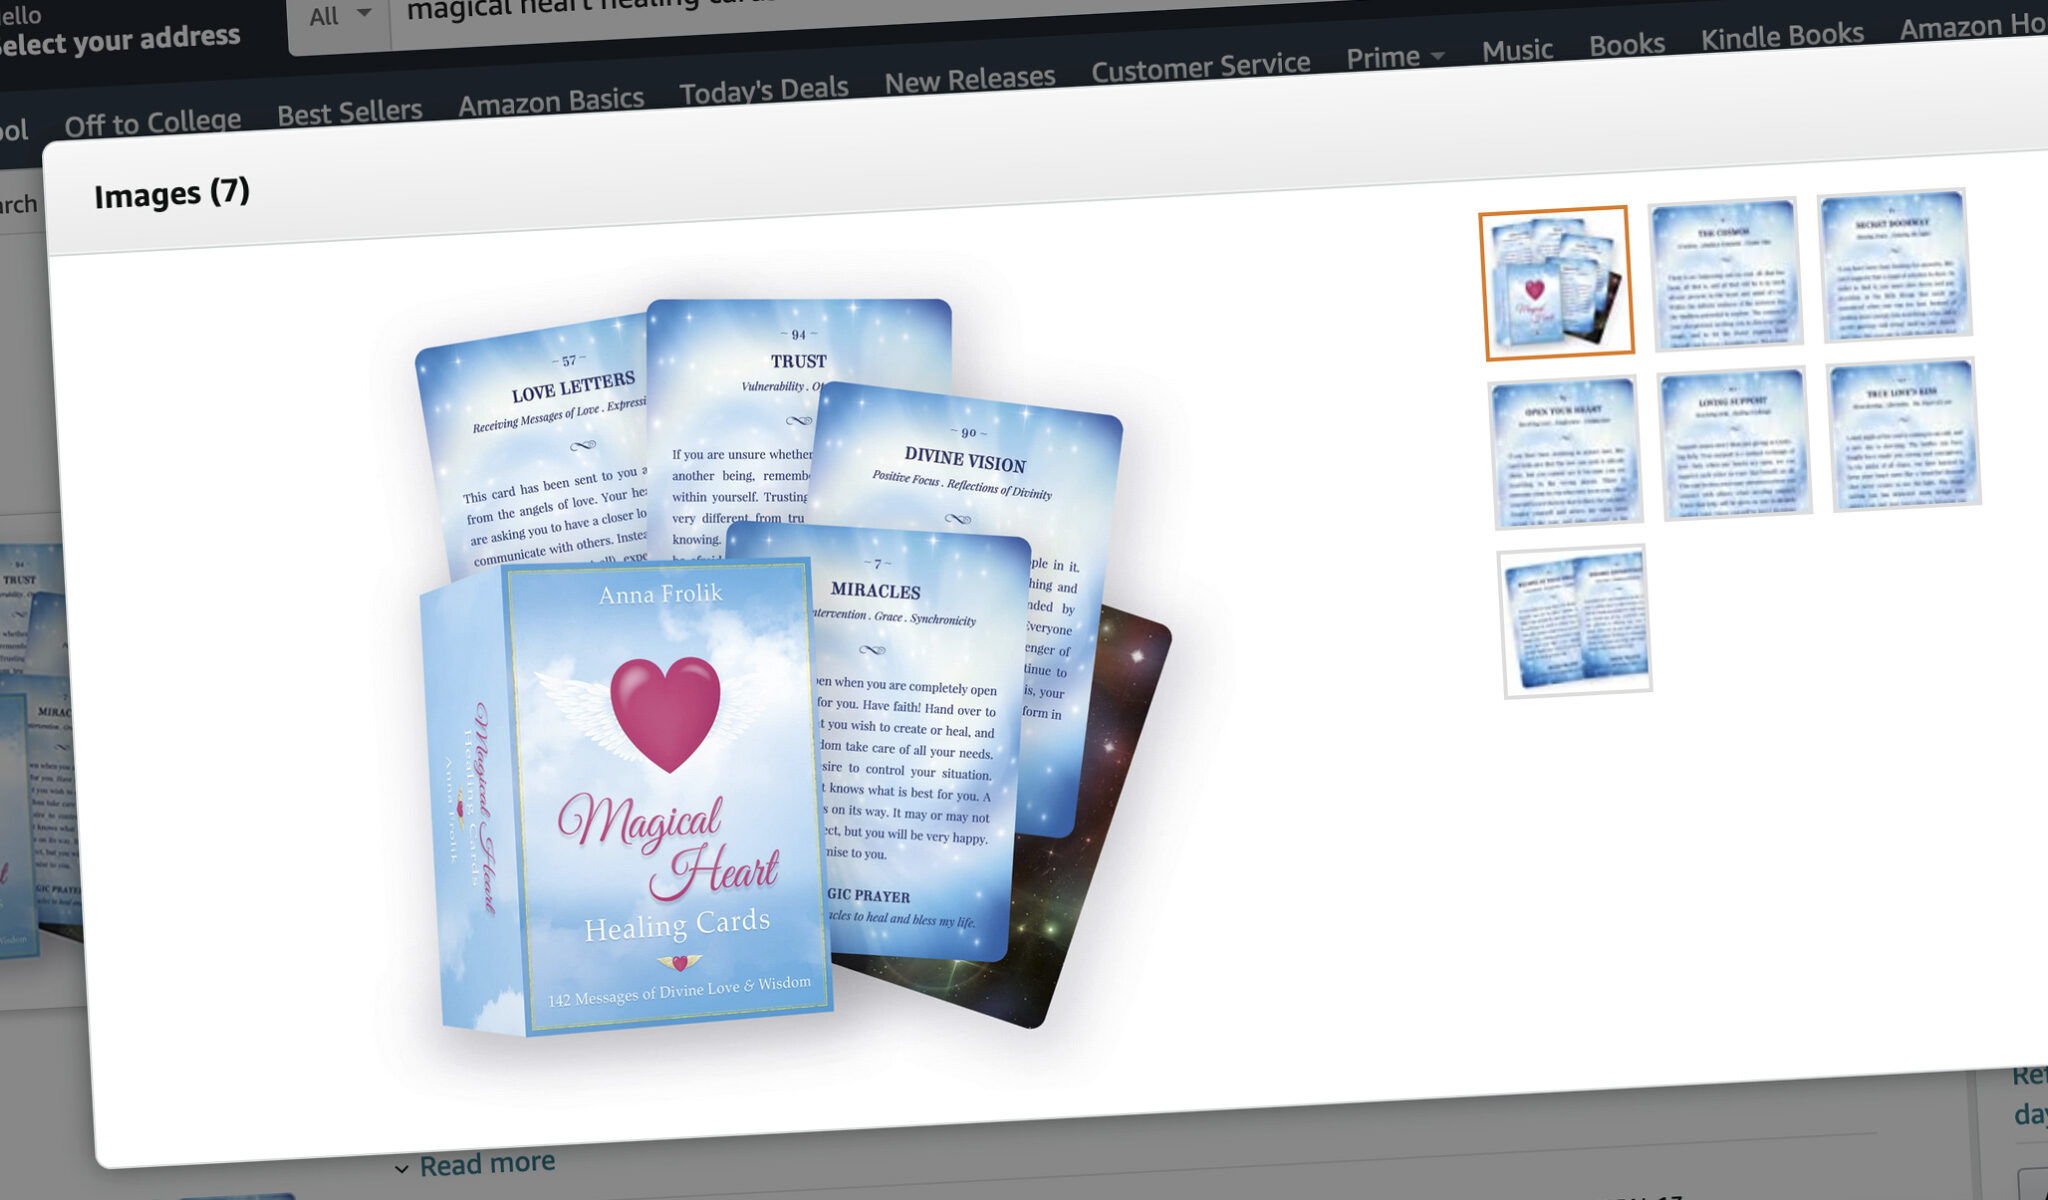 Magical Heart Healing Cards (Amazon Listing)